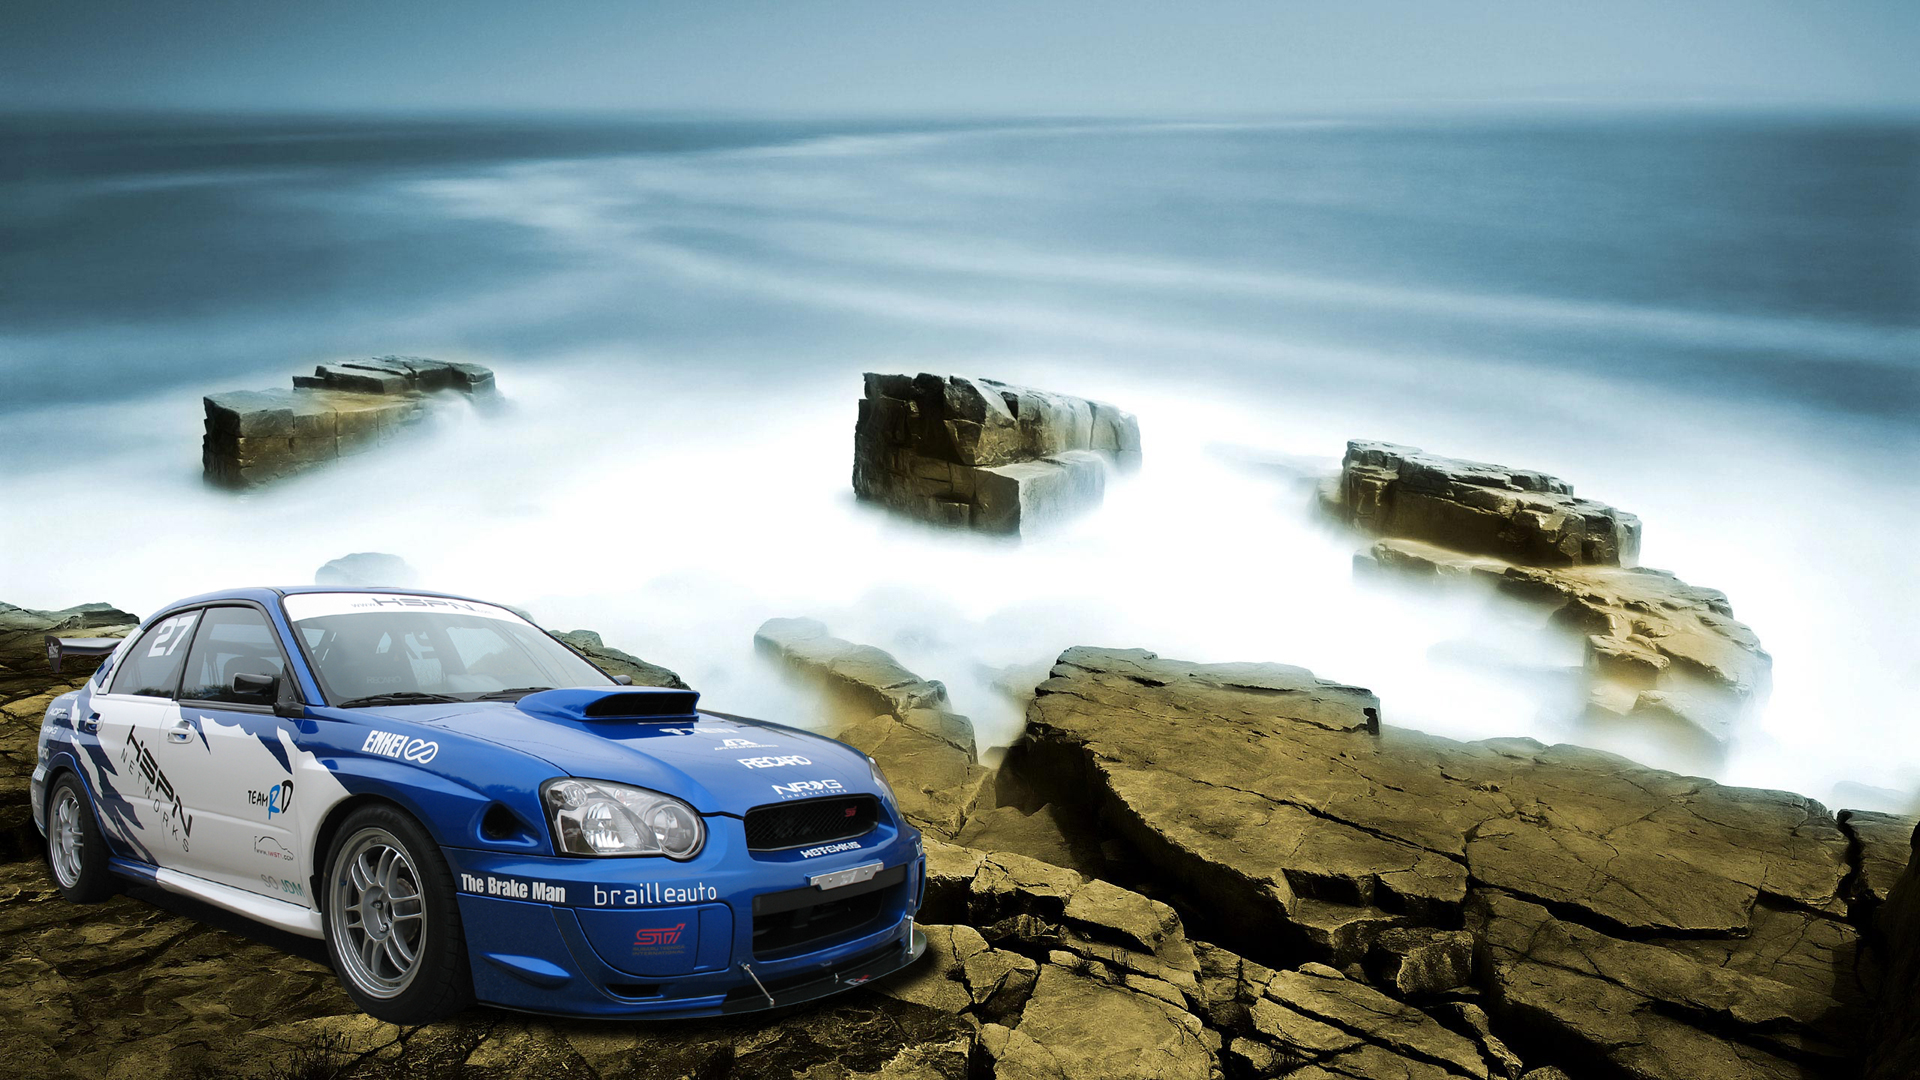 related car wallpapers 1080p